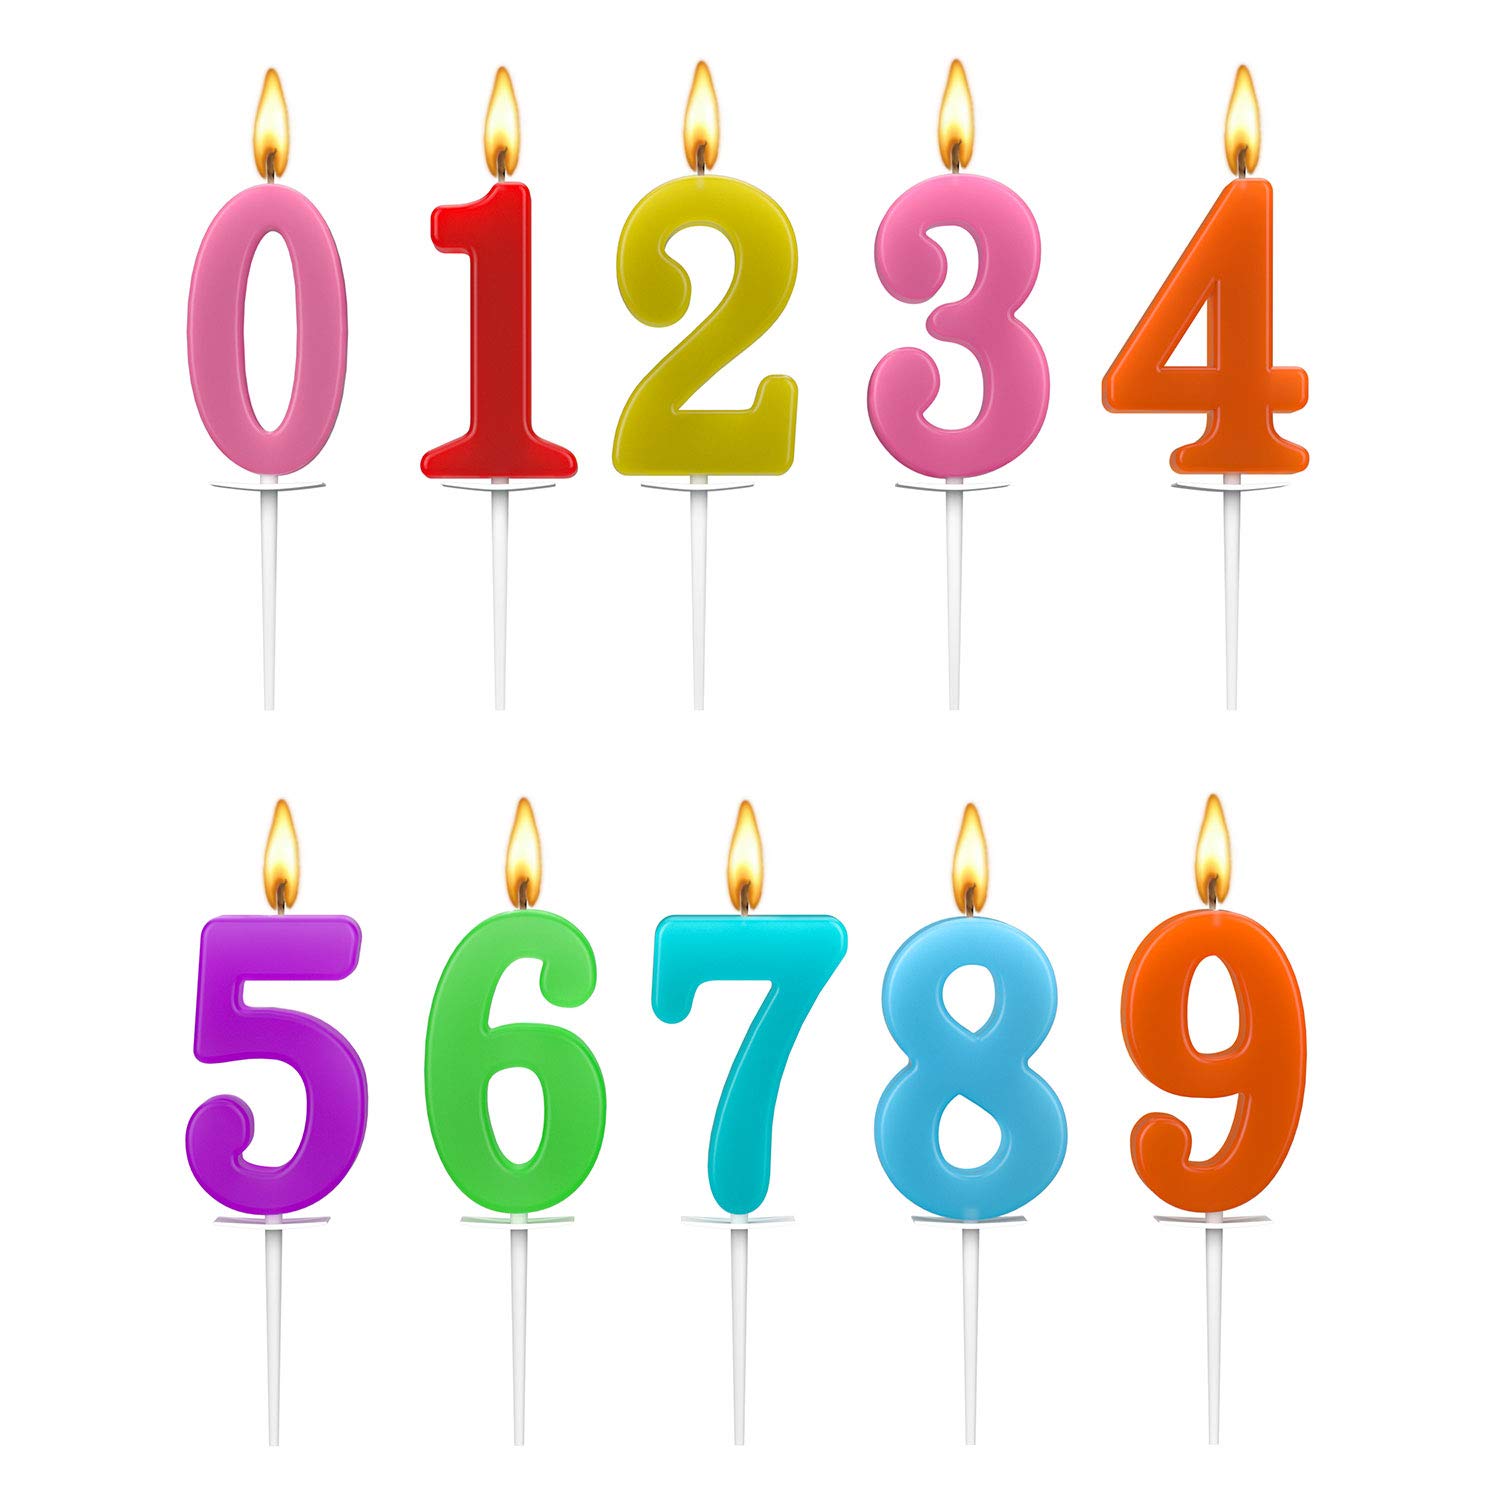 BEAN LIEVE Beanlieve 10-Pieces Numeral Birthday candles - cake Numeral candles Number 0-9 glitter cake Topper Decoration for Birthday,Weddi